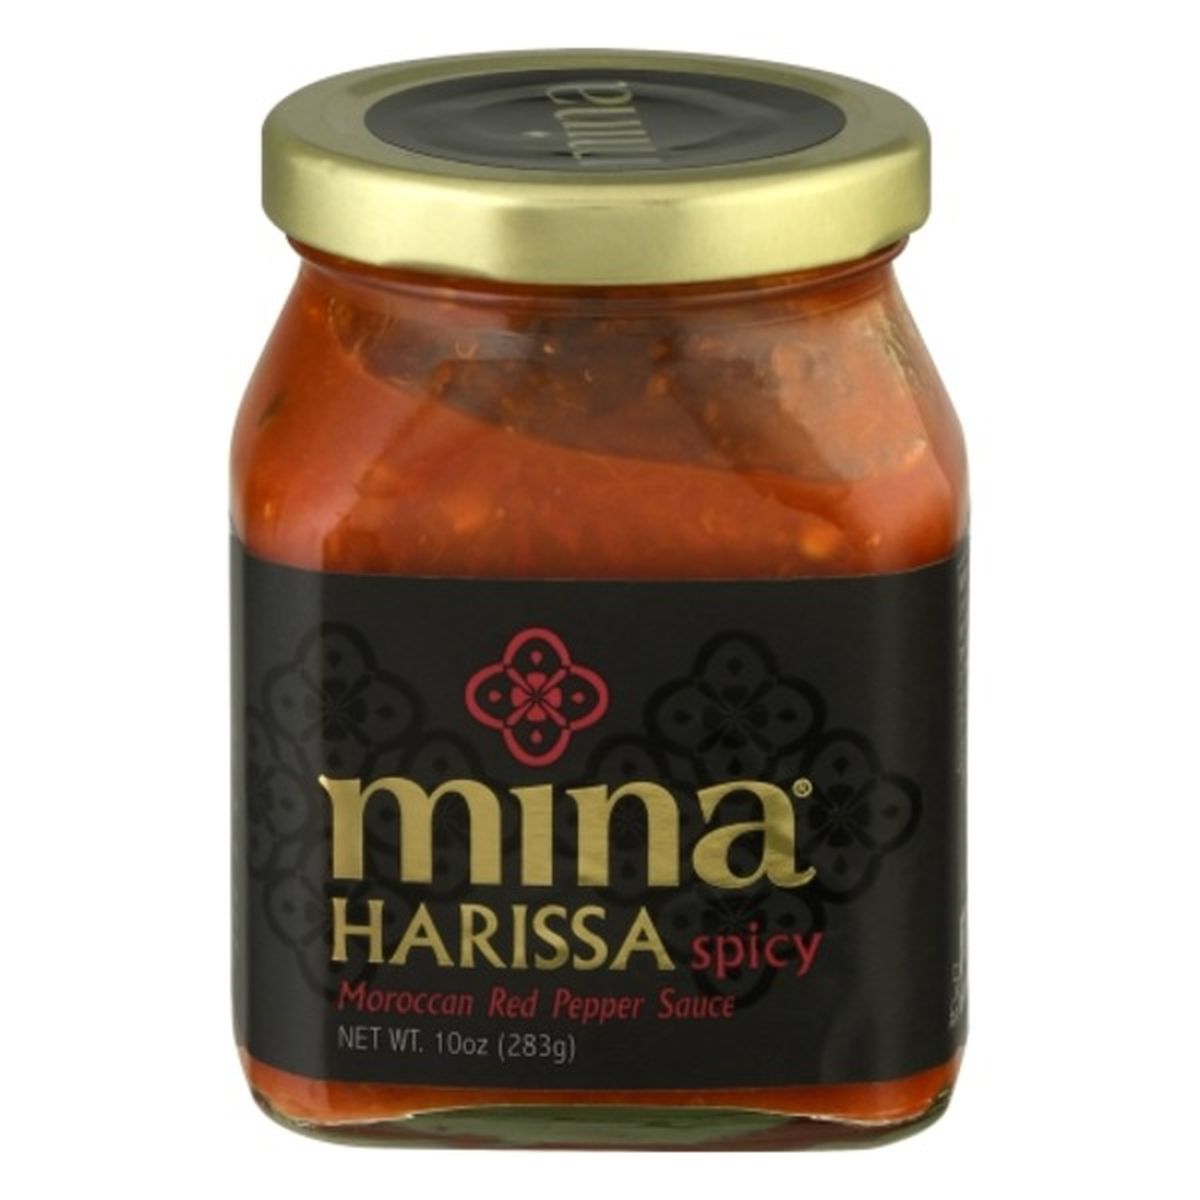 Calories in Mina Red Pepper Sauce, Moroccan, Spicy